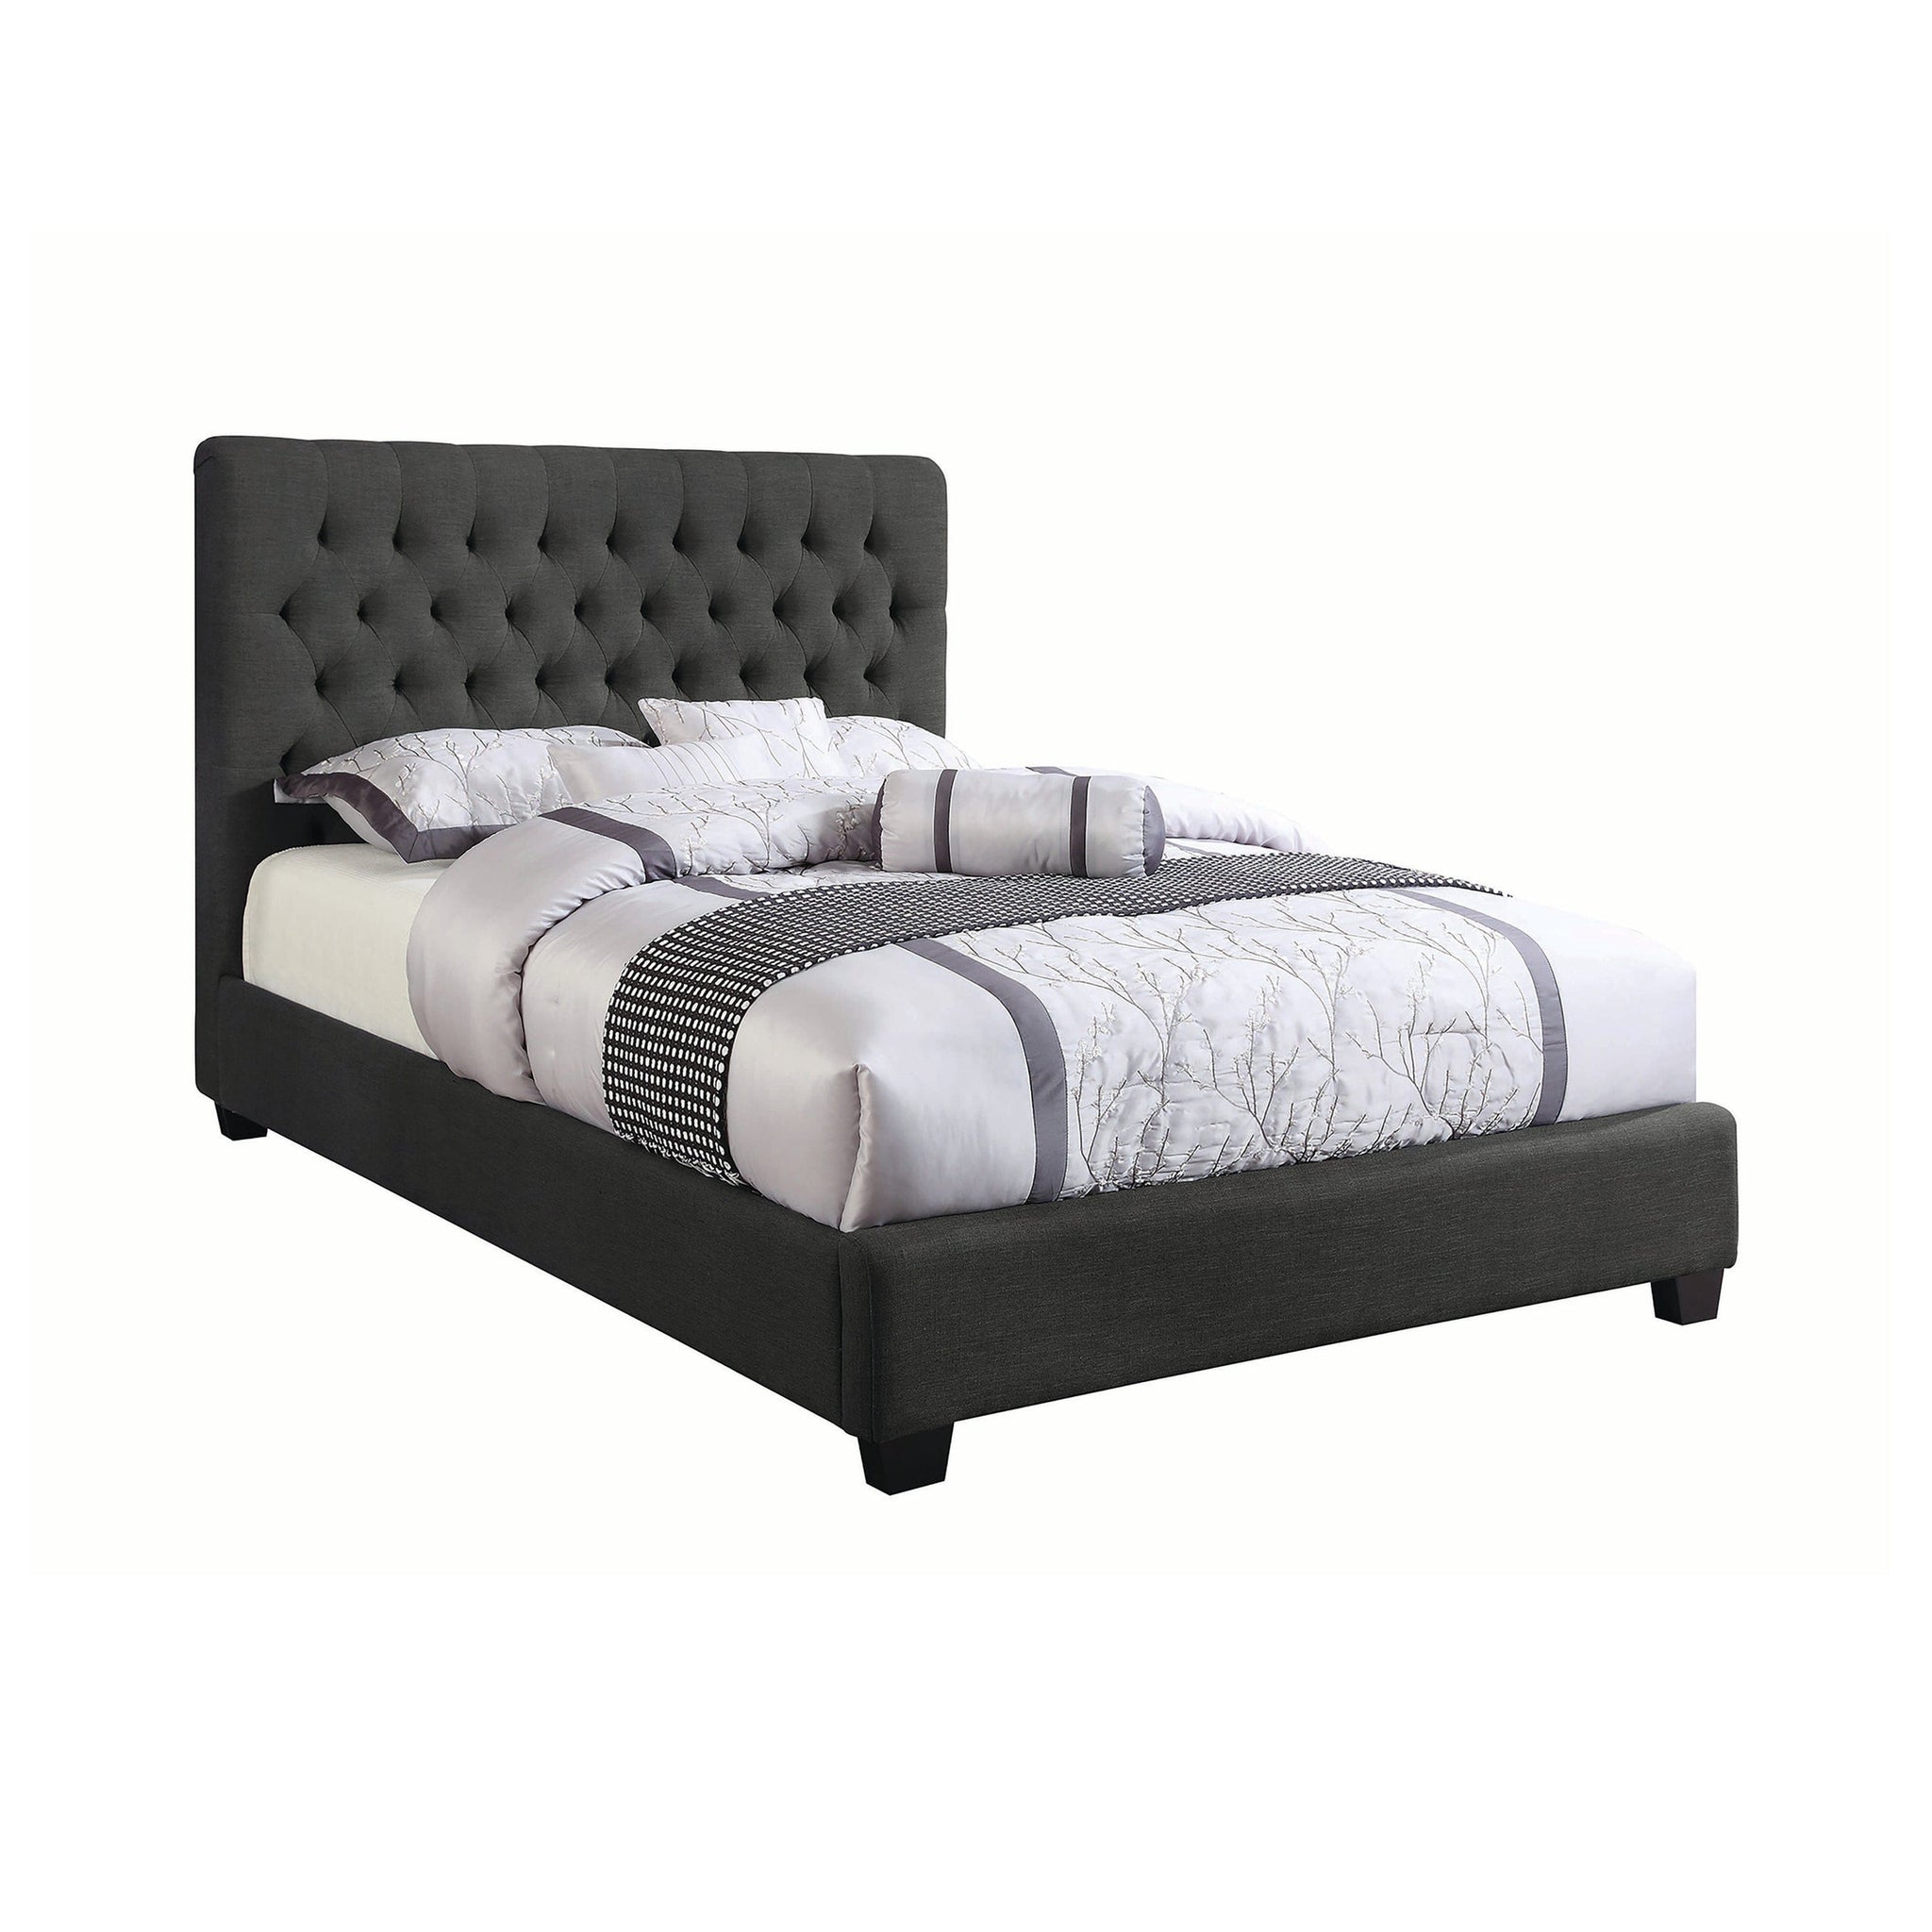 Chloe Tufted Upholstered Full Bed Charcoal - 300529F